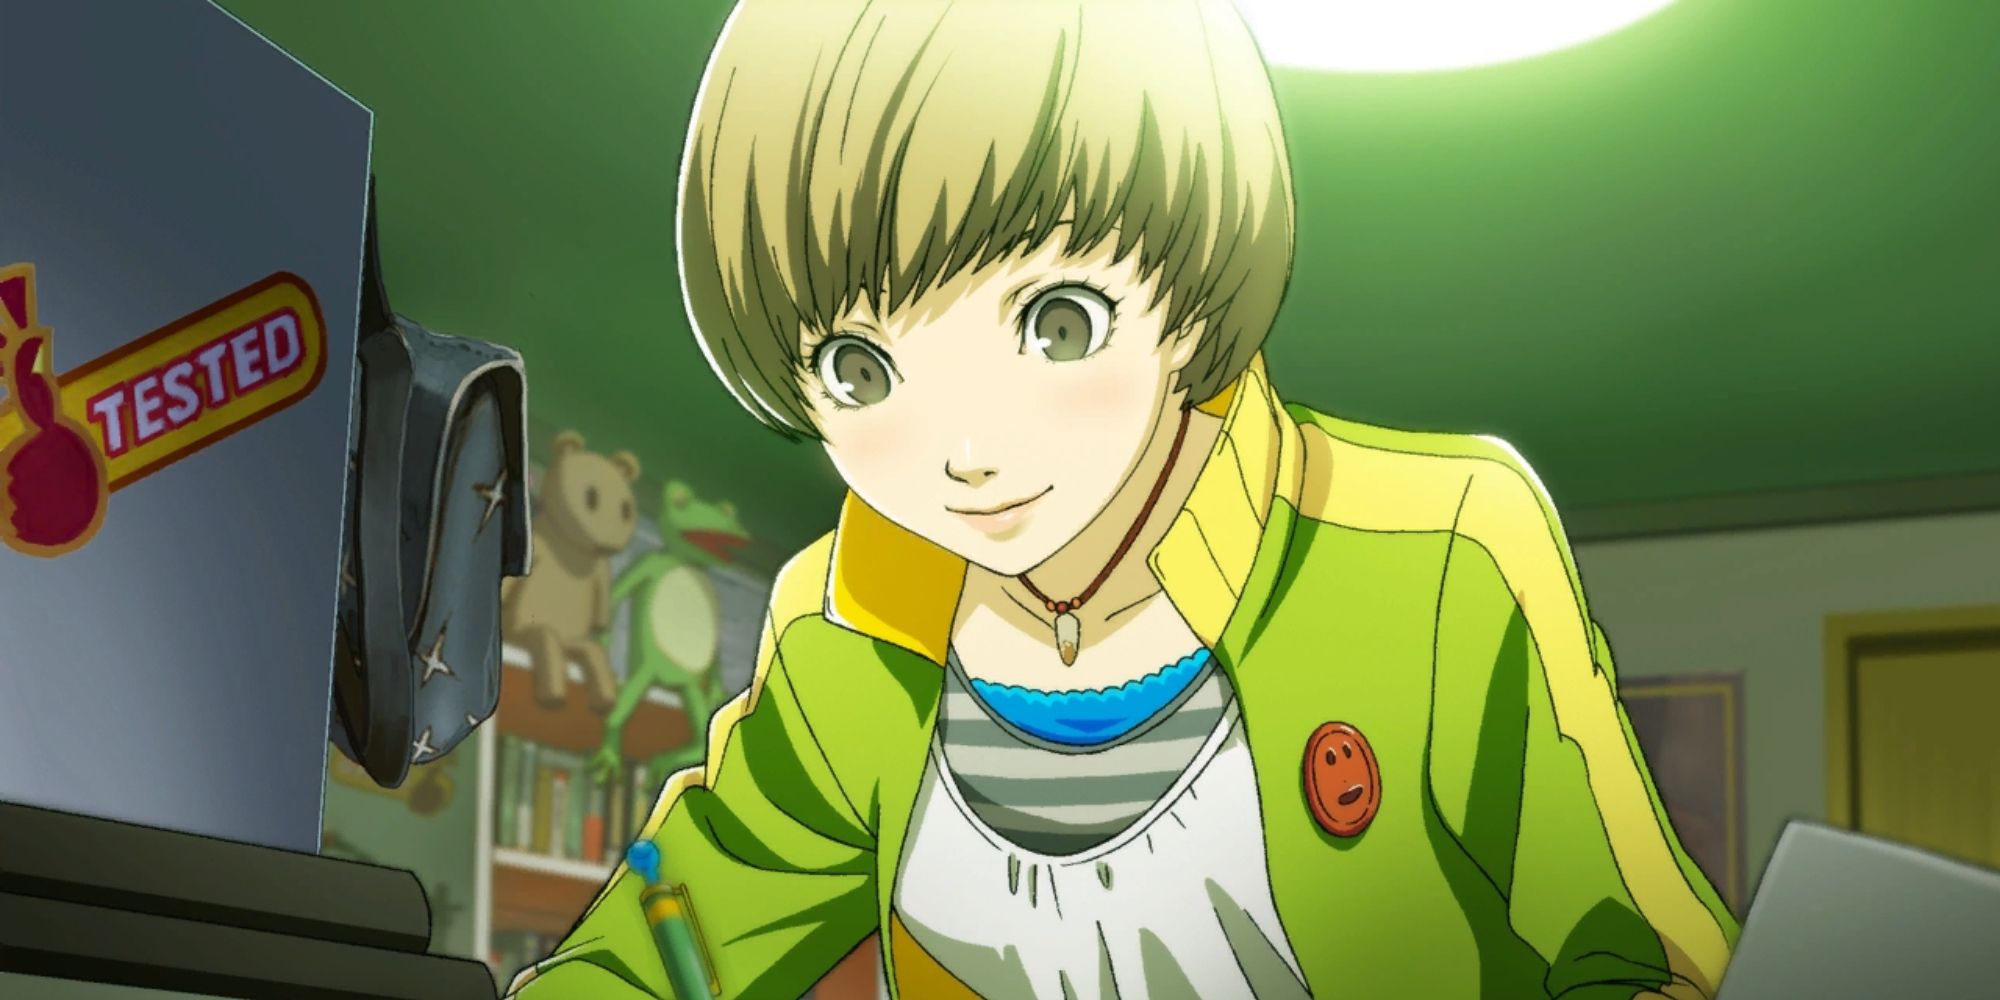 an animated shot of Chie Satonaka from Persona 4 Golden sat at her desk writing